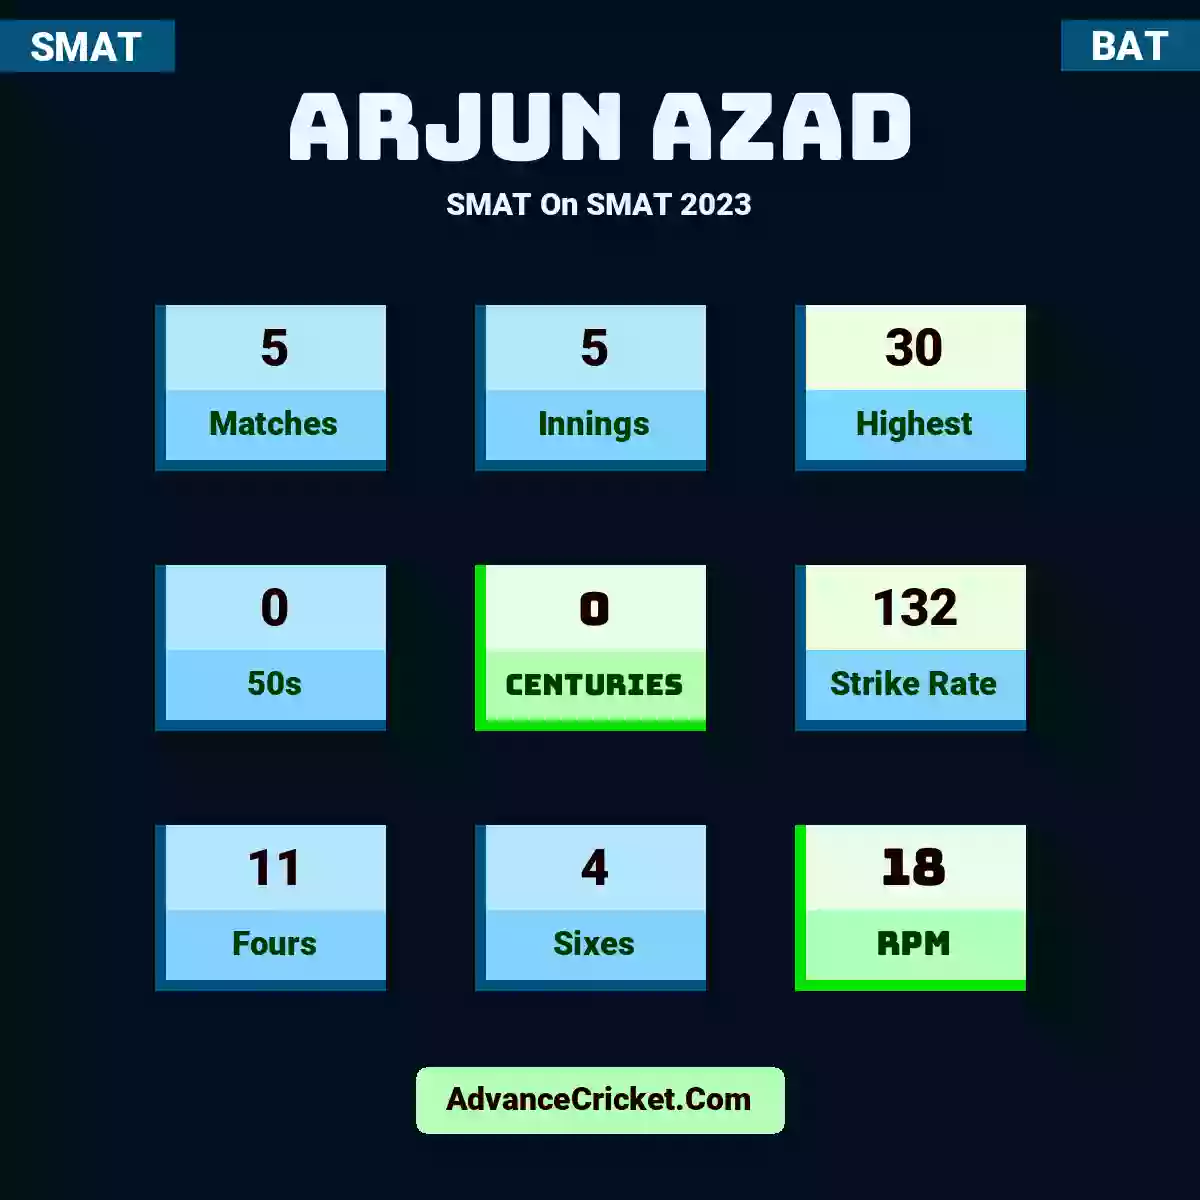 Arjun Azad SMAT  On SMAT 2023, Arjun Azad played 5 matches, scored 30 runs as highest, 0 half-centuries, and 0 centuries, with a strike rate of 132. A.Azad hit 11 fours and 4 sixes, with an RPM of 18.